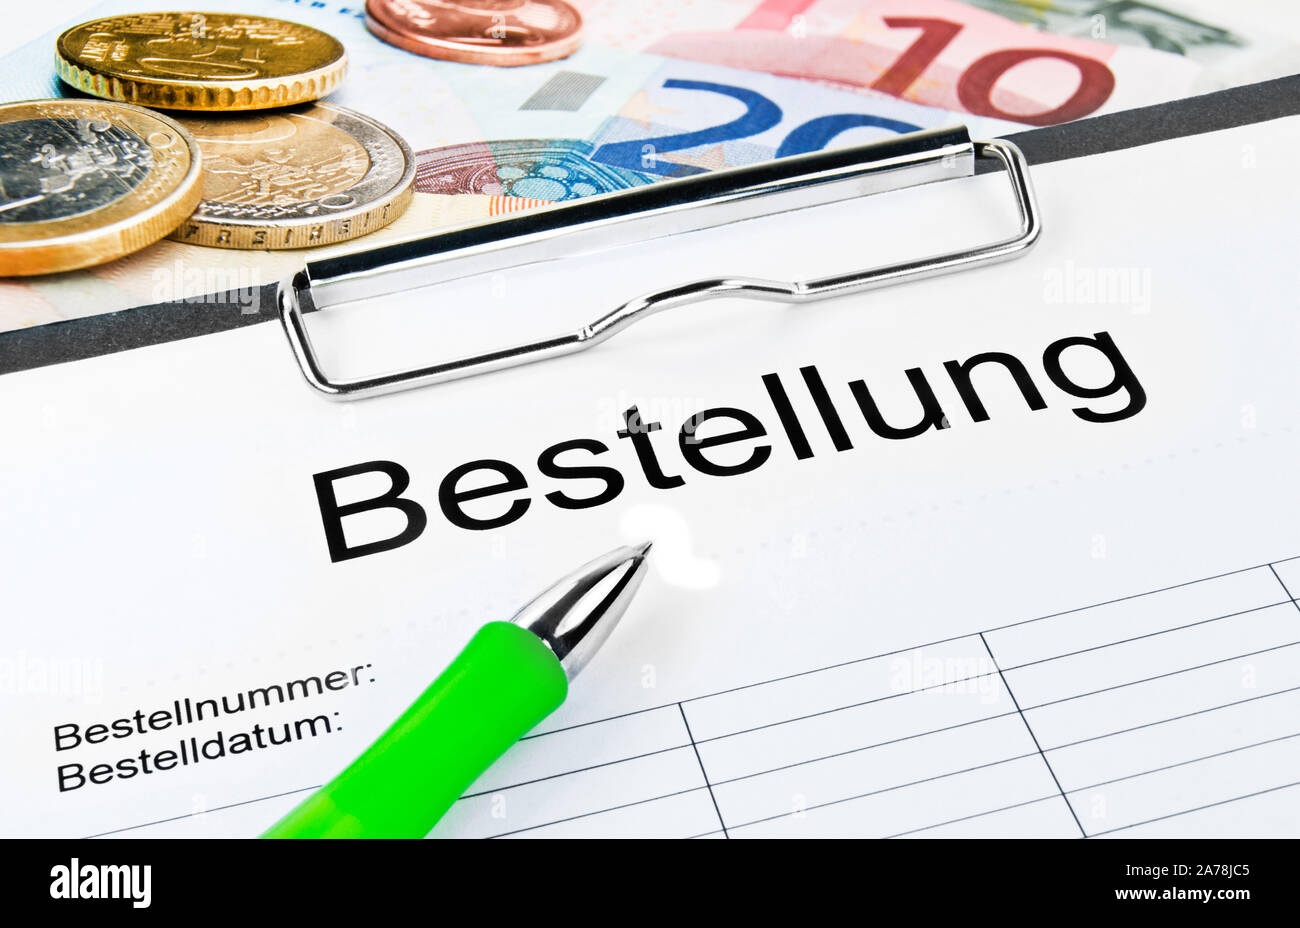 Order - Bestellung with Euro money Stock Photo